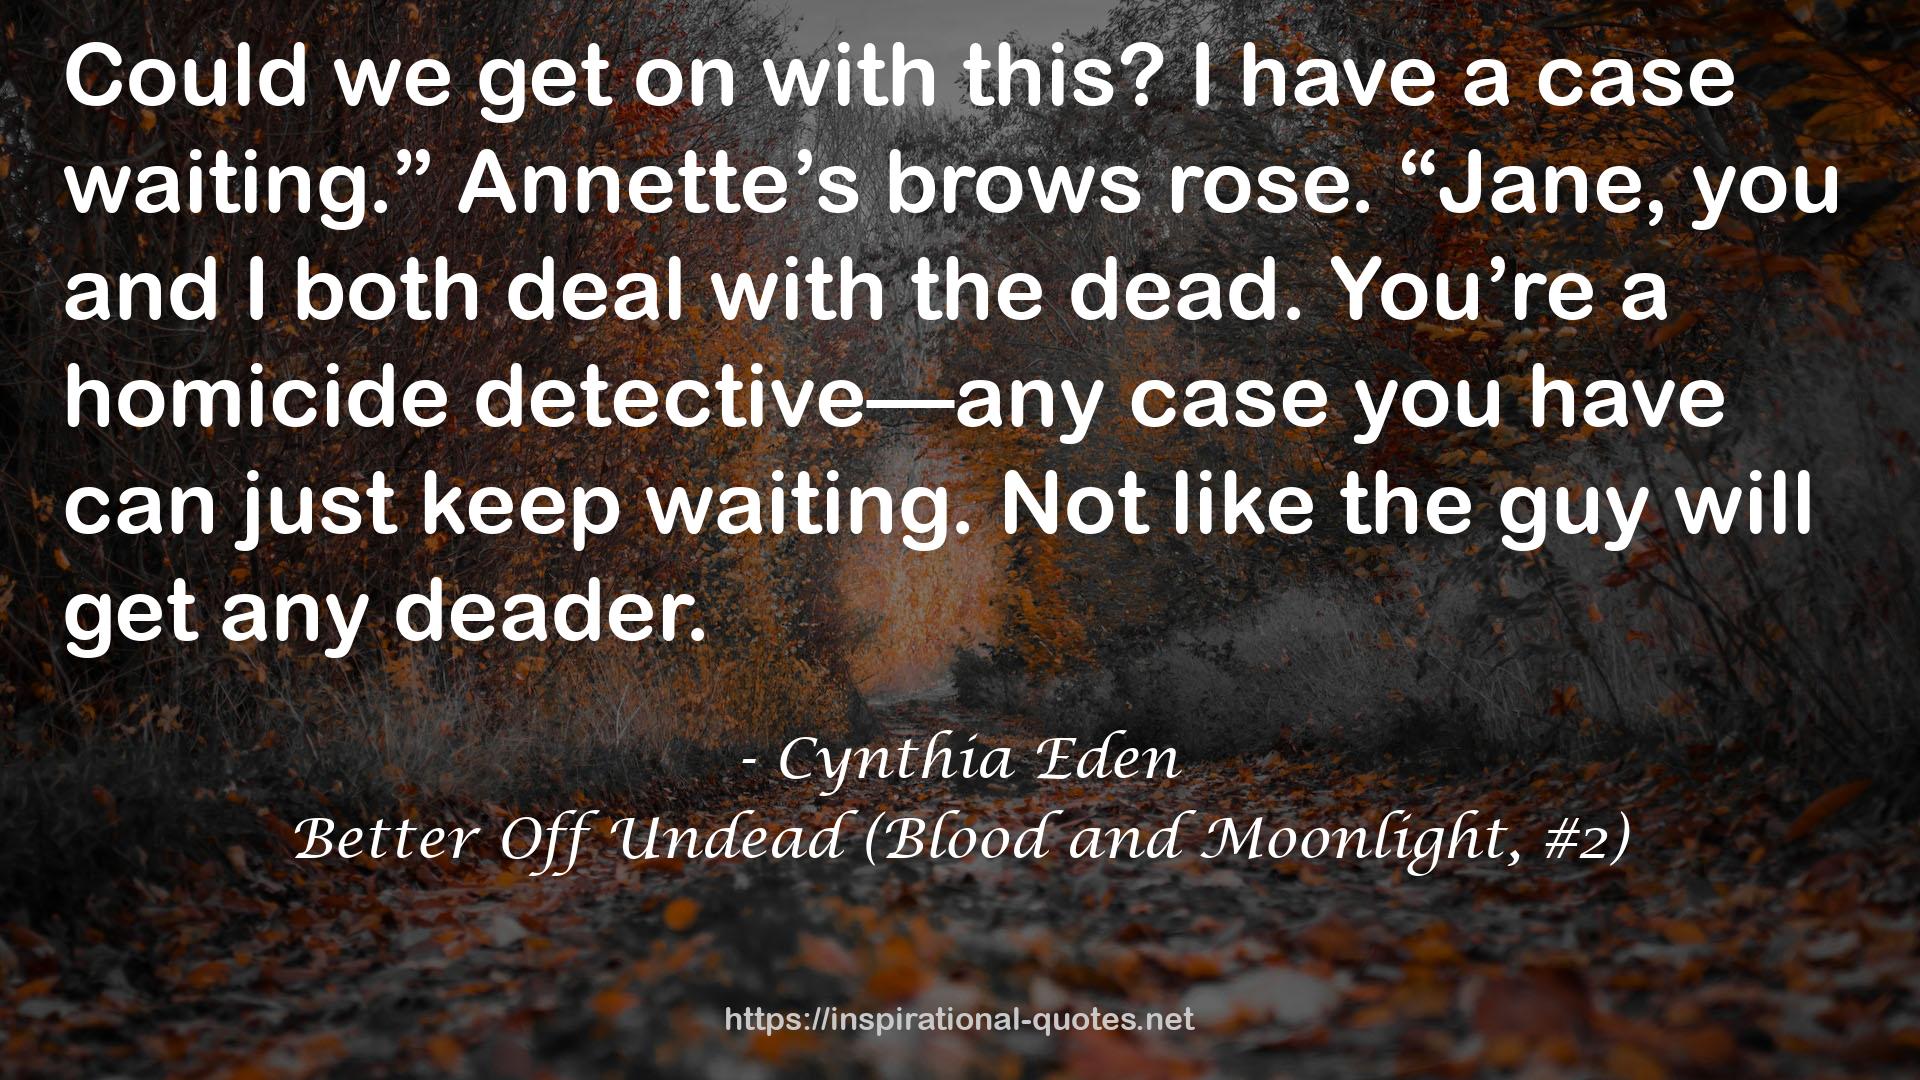 Better Off Undead (Blood and Moonlight, #2) QUOTES